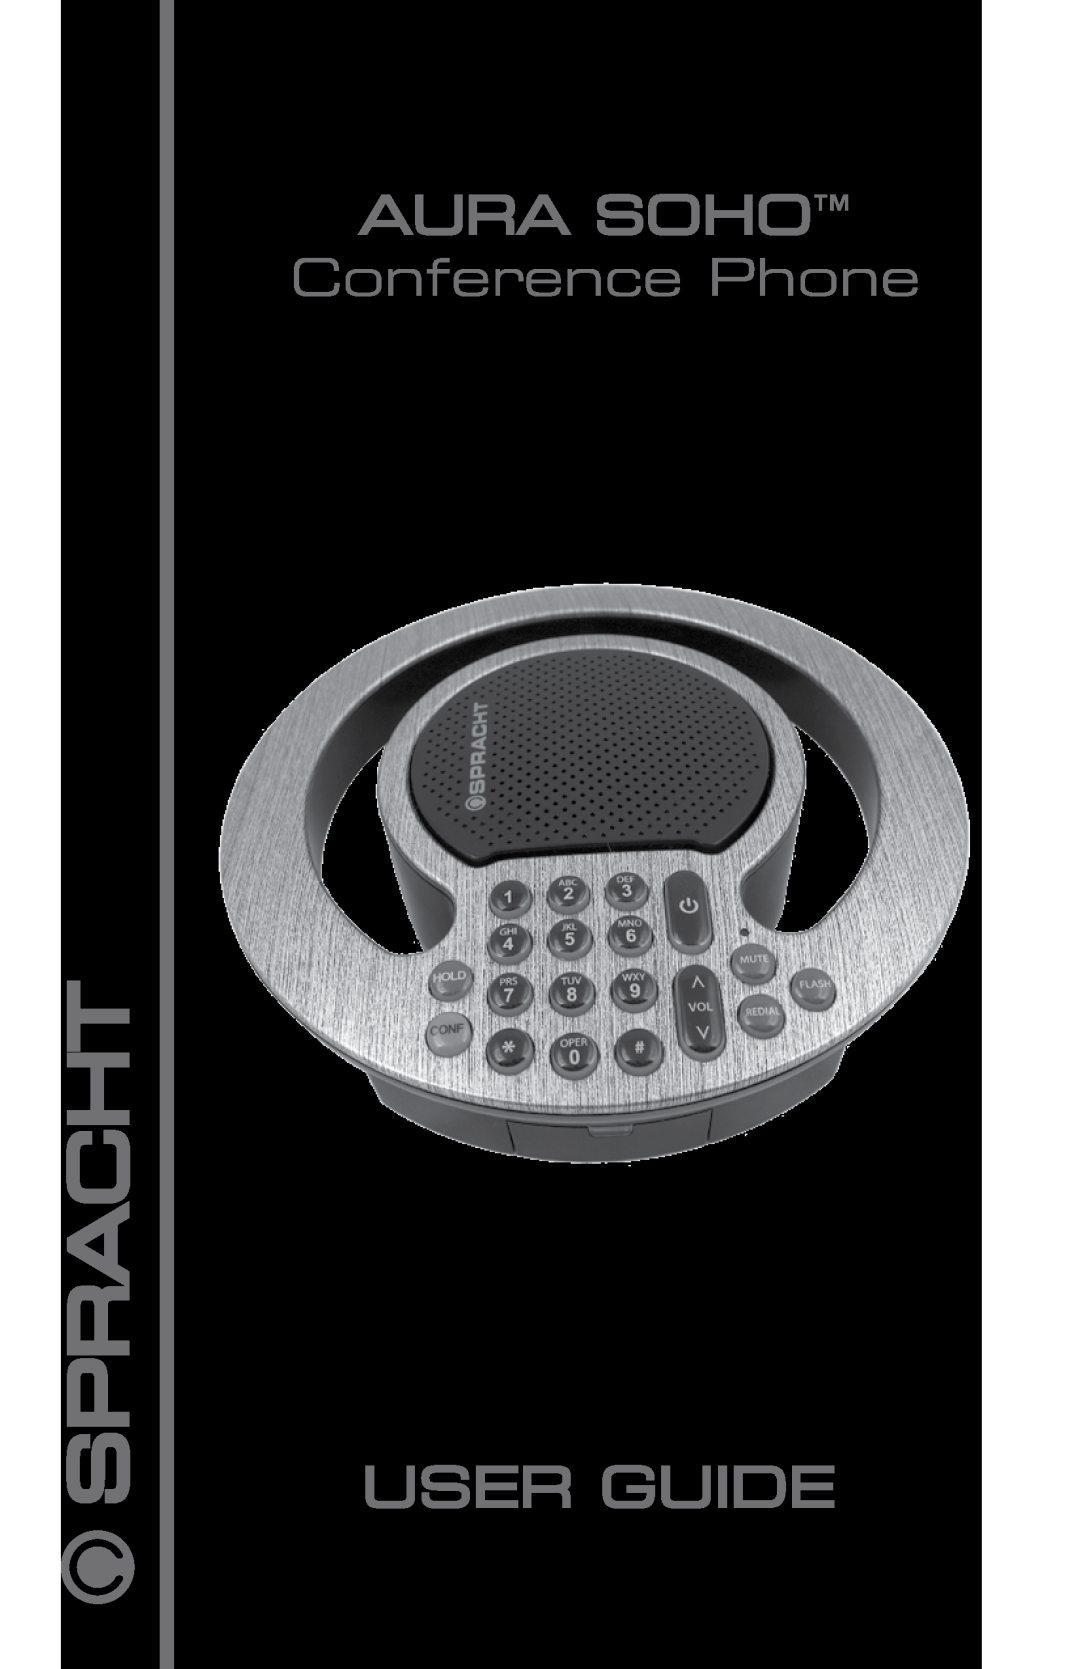 Technicolor - Thomson CP-2016-007 manual Spracht, User Guide, AURA SOHO Conference Phone 